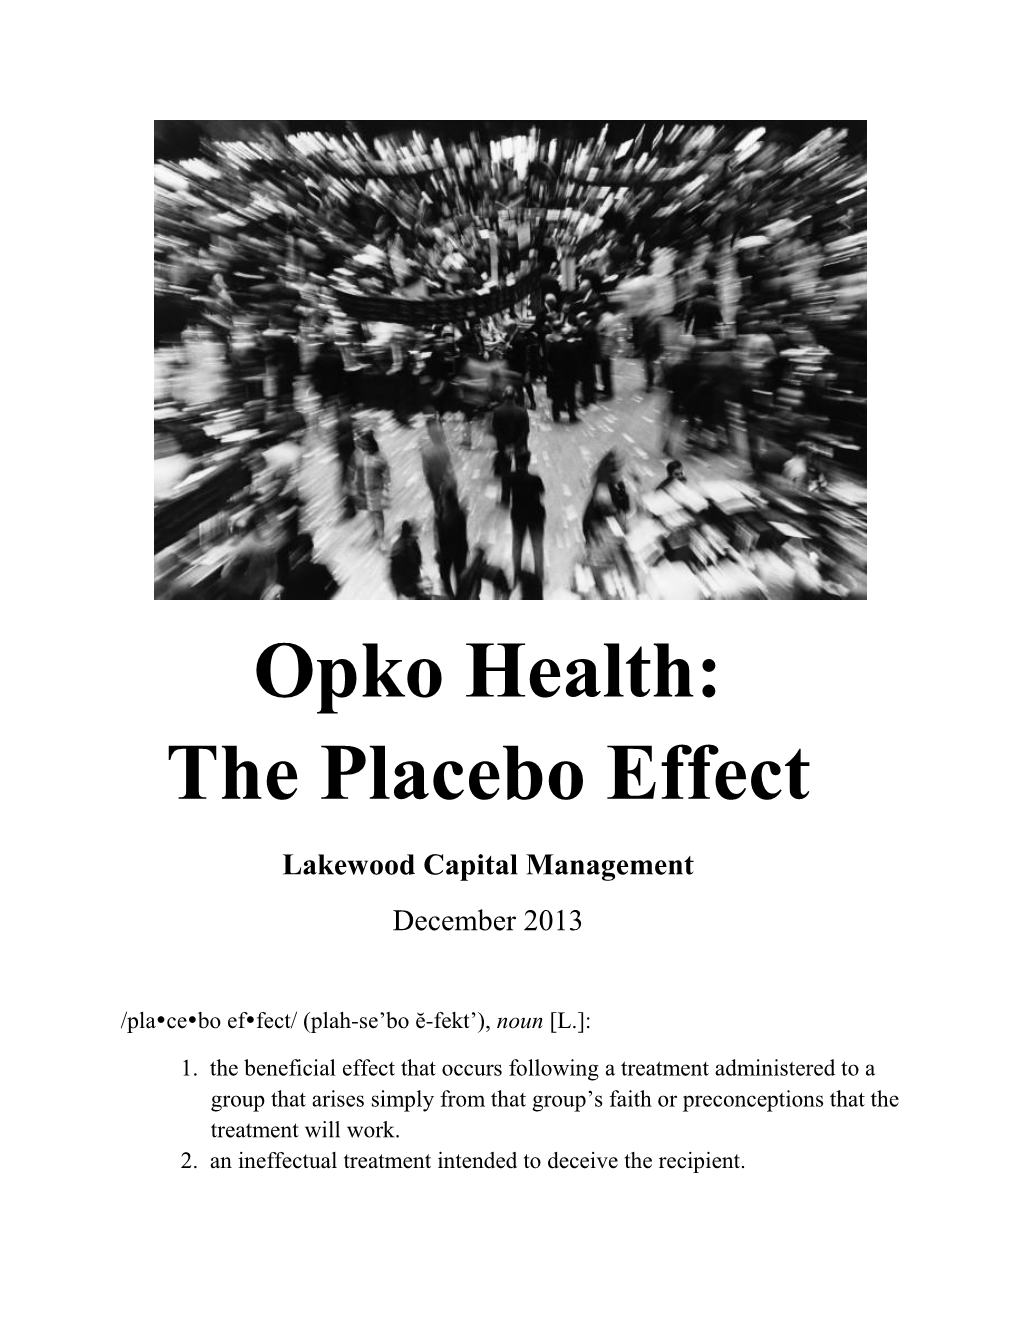 Opko Health: the Placebo Effect